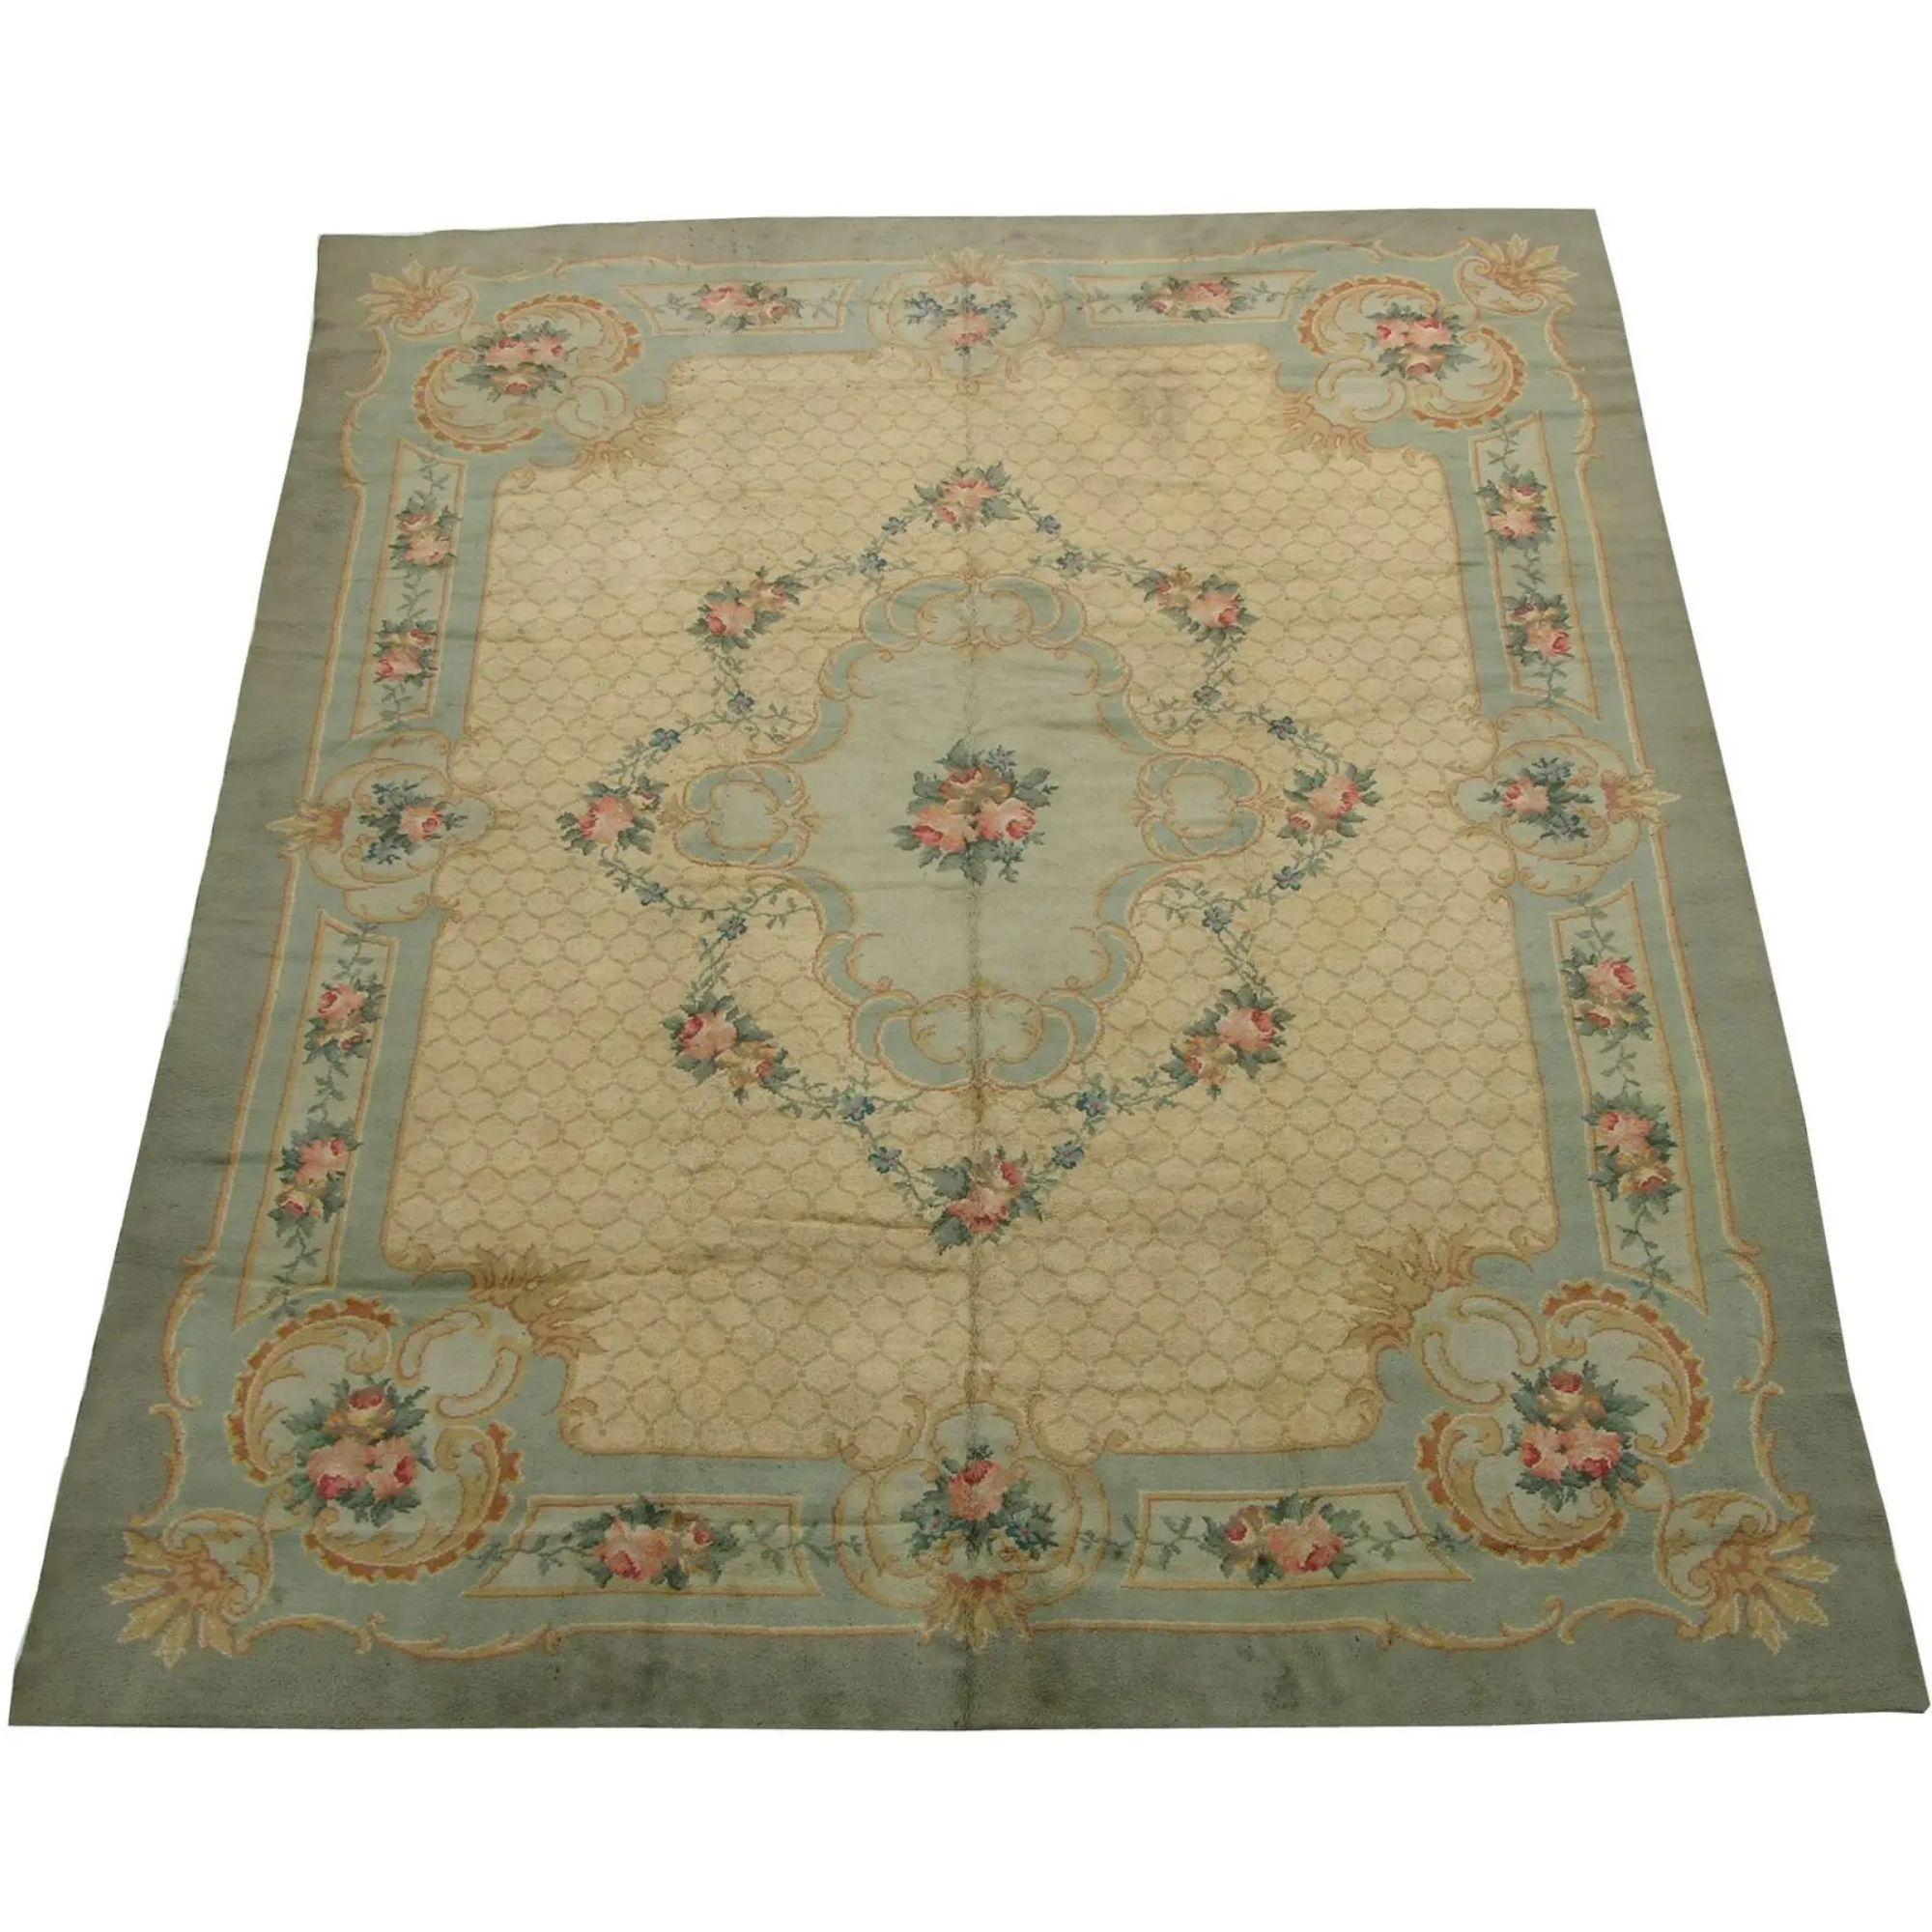 1900s Antique European Rug 13′ × 16′3″ In Good Condition For Sale In Los Angeles, US